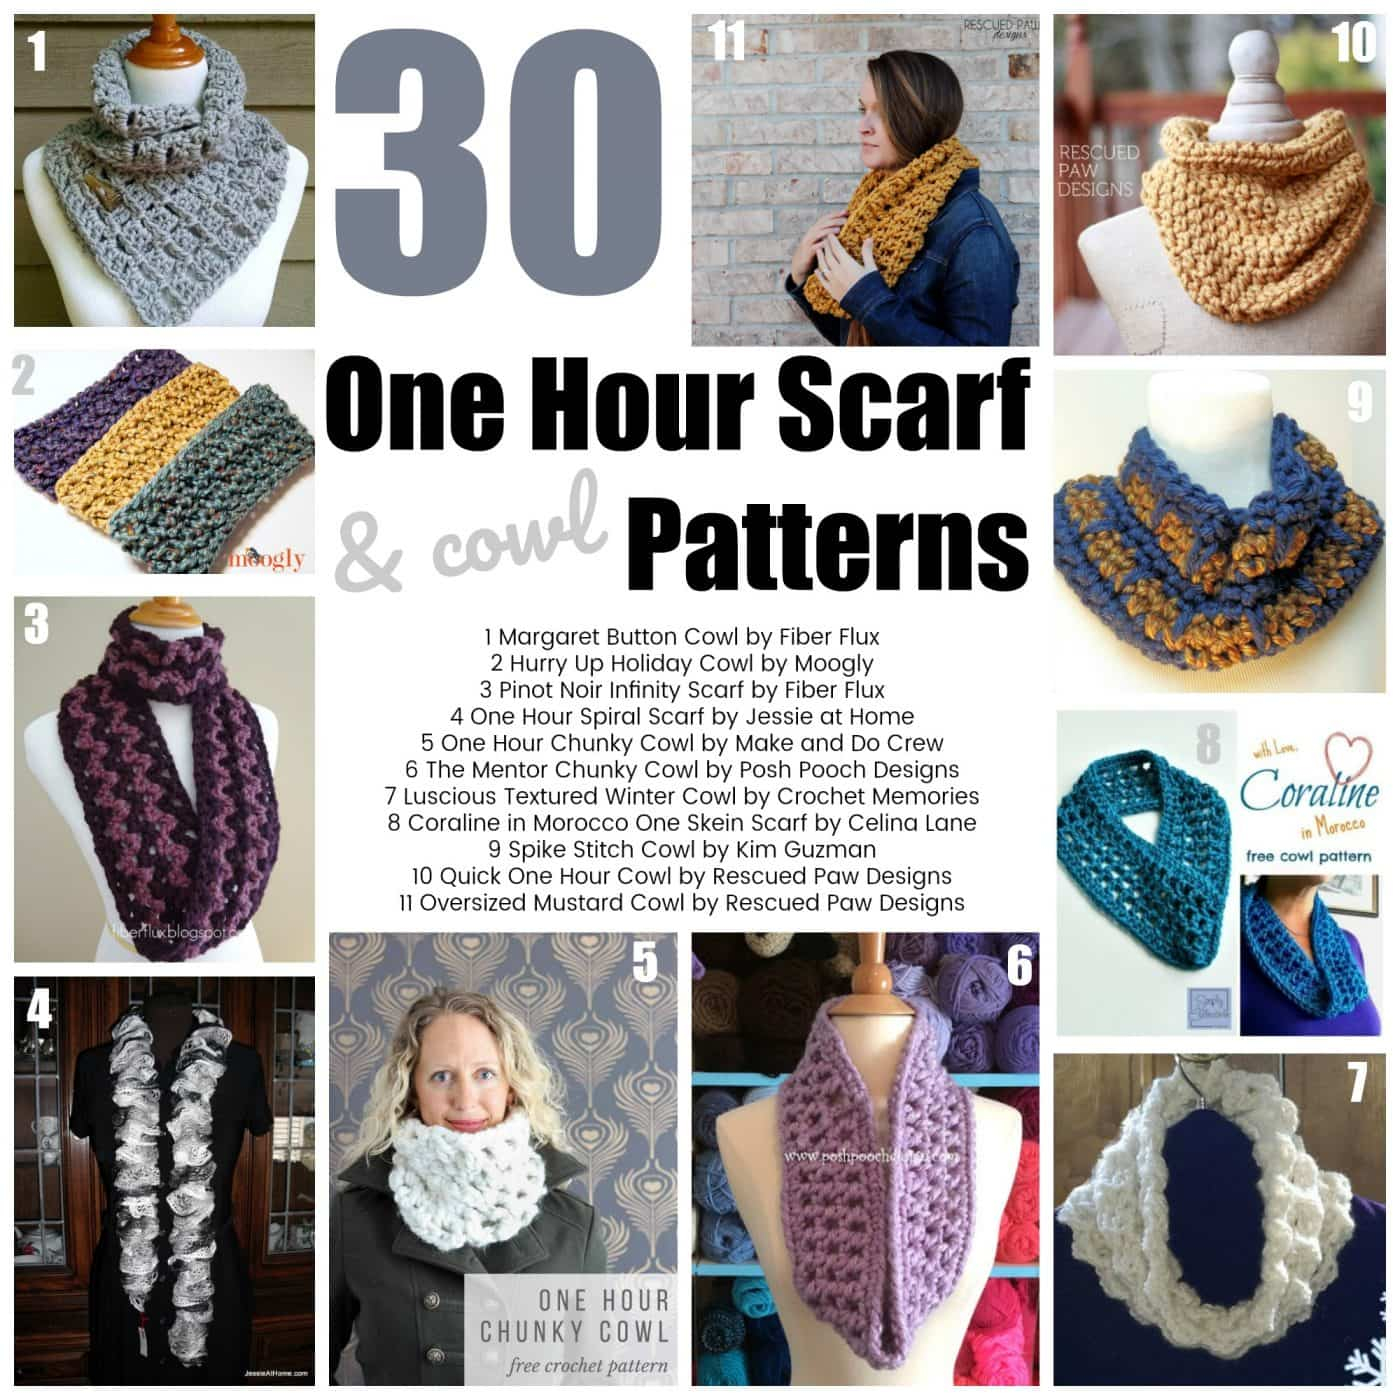 Free Chunky Cowl Crochet Pattern Quick Crochet Projects 30 One Hour Scarf Patterns Oombawka Design